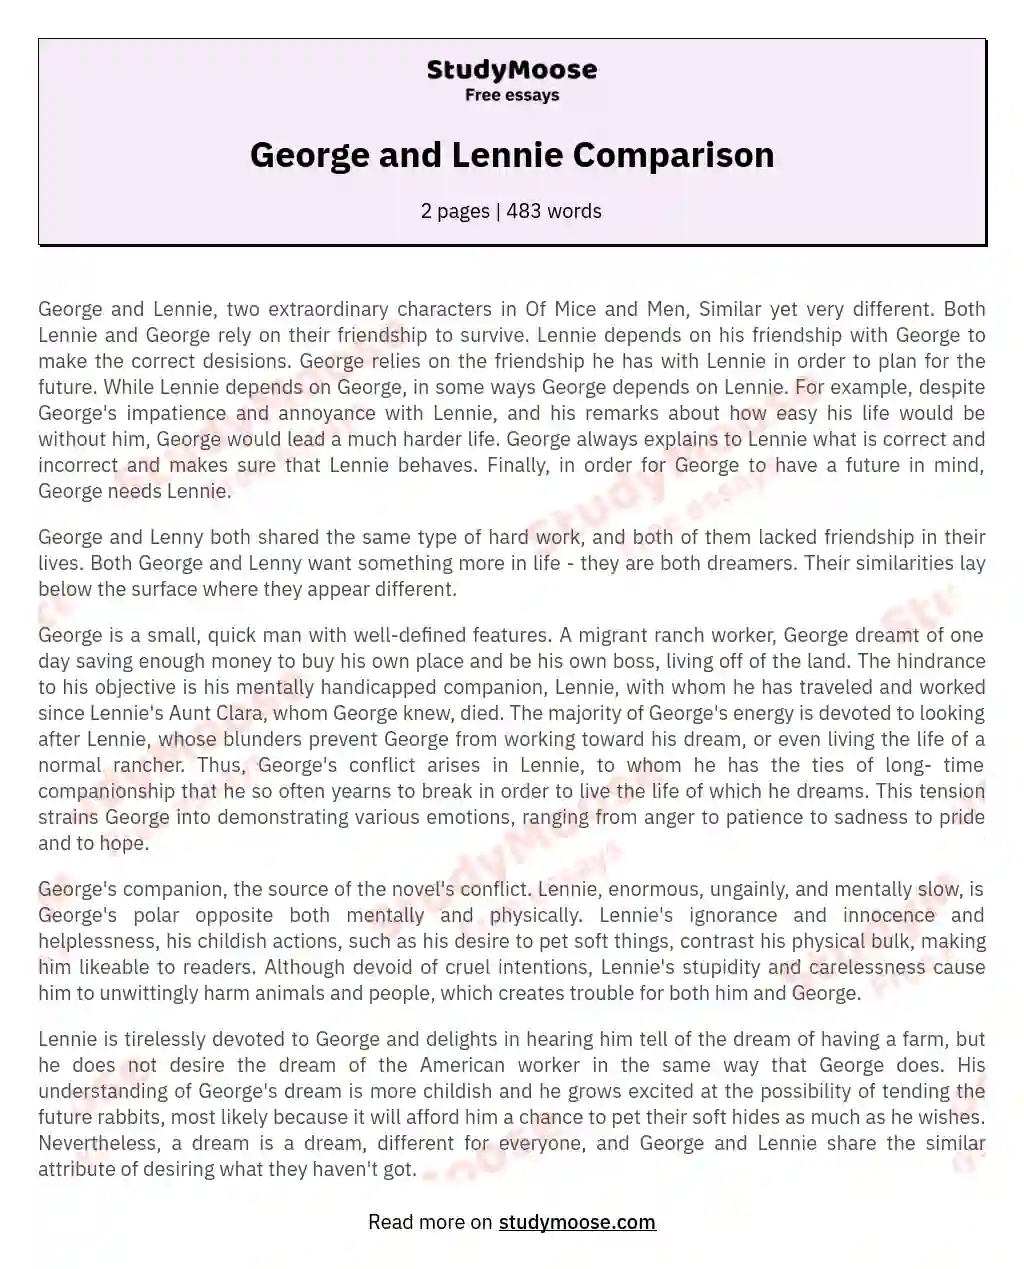 The Complex Friendship of George and Lennie in Of Mice and Men essay